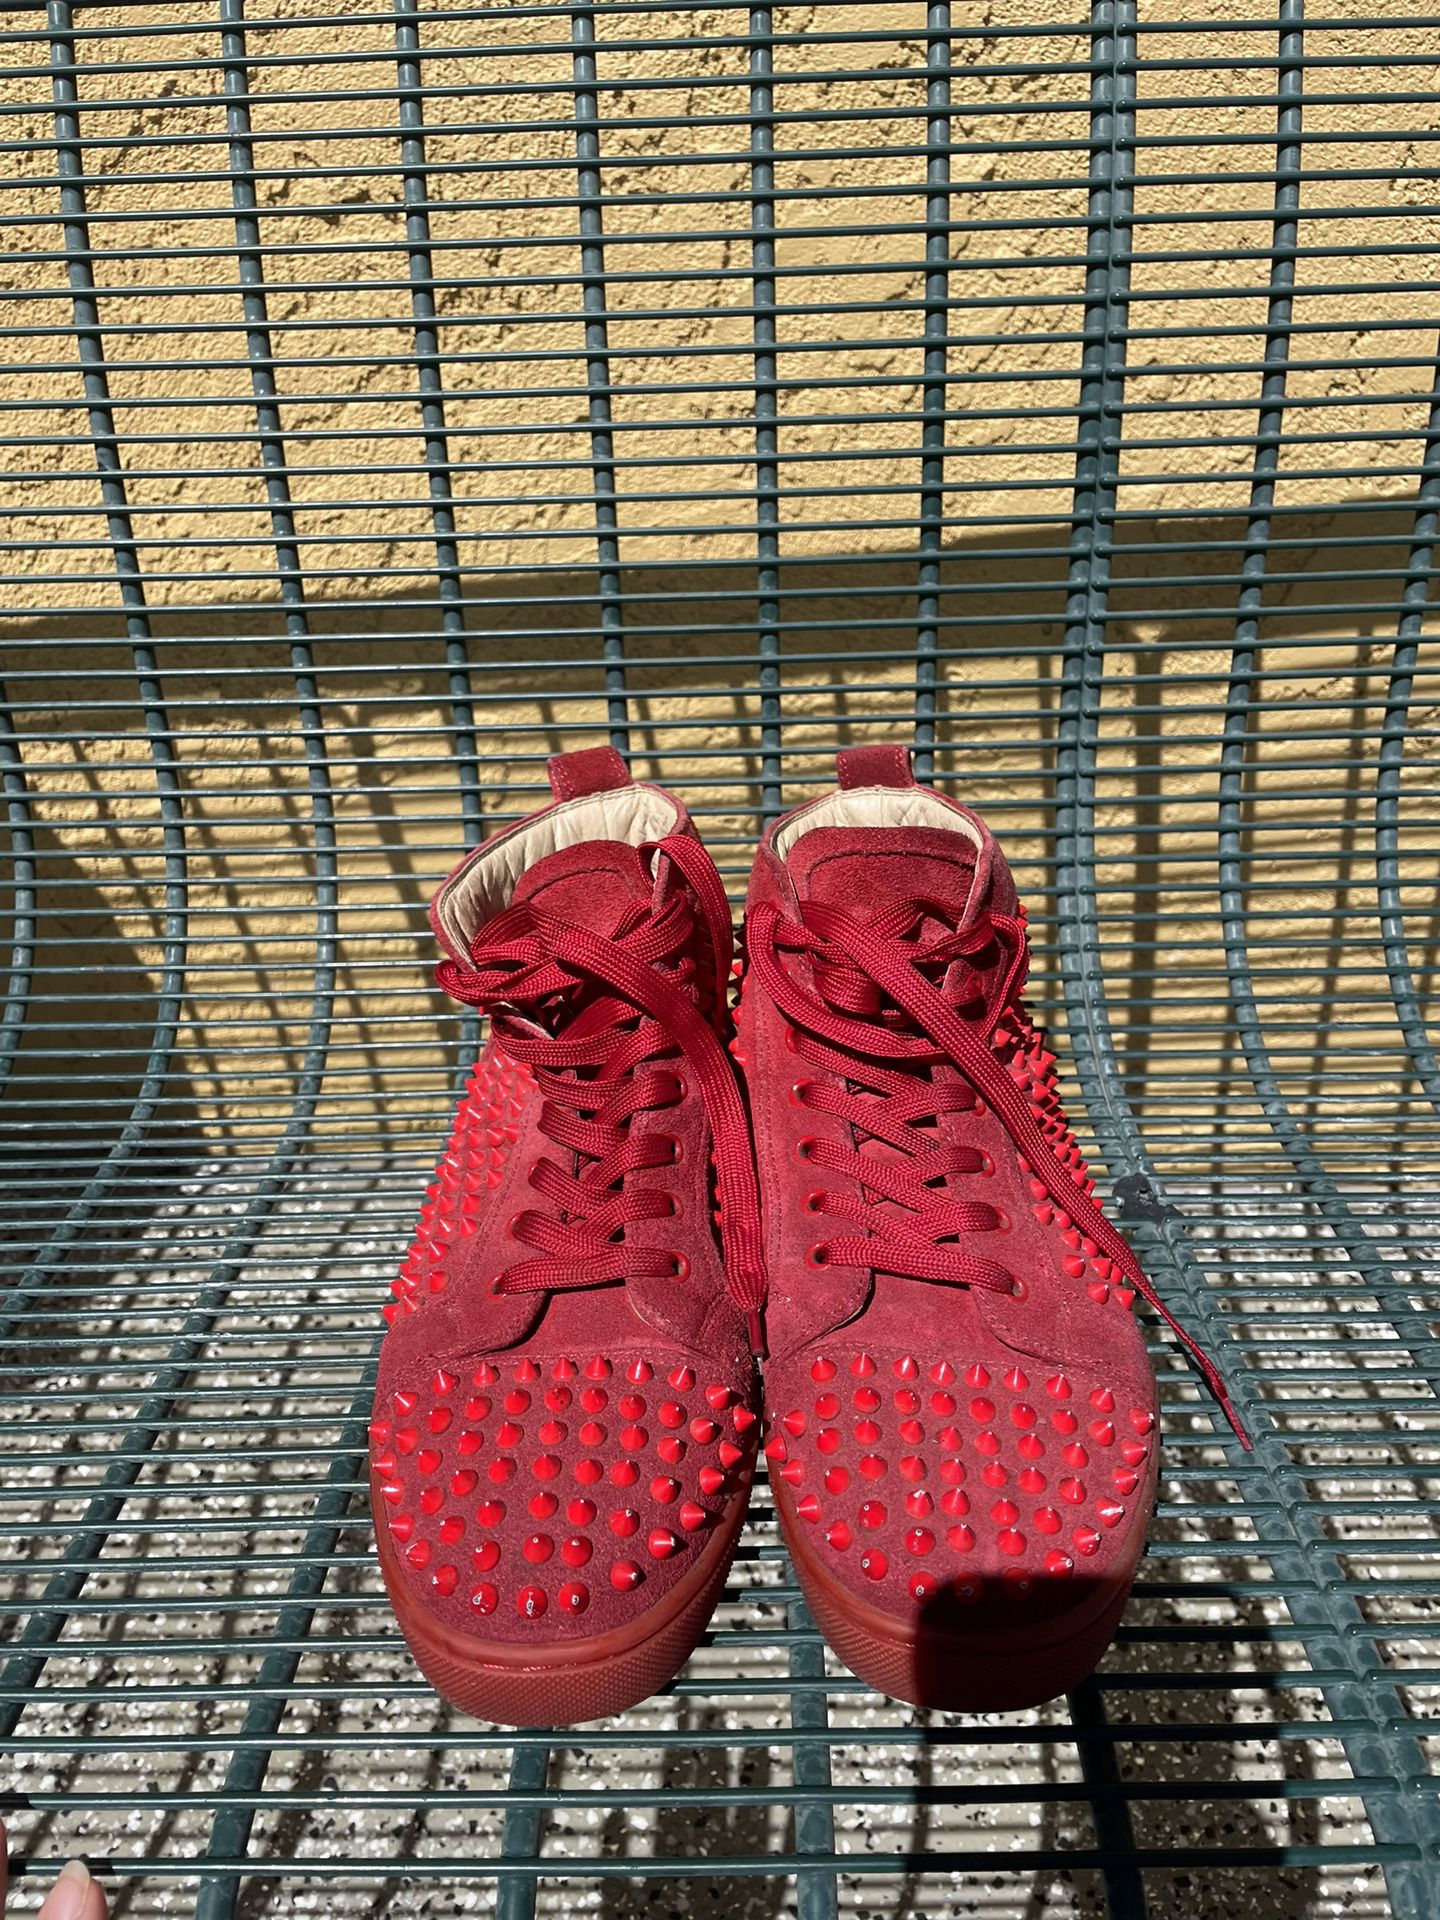 louis vuitton red bottom shoes